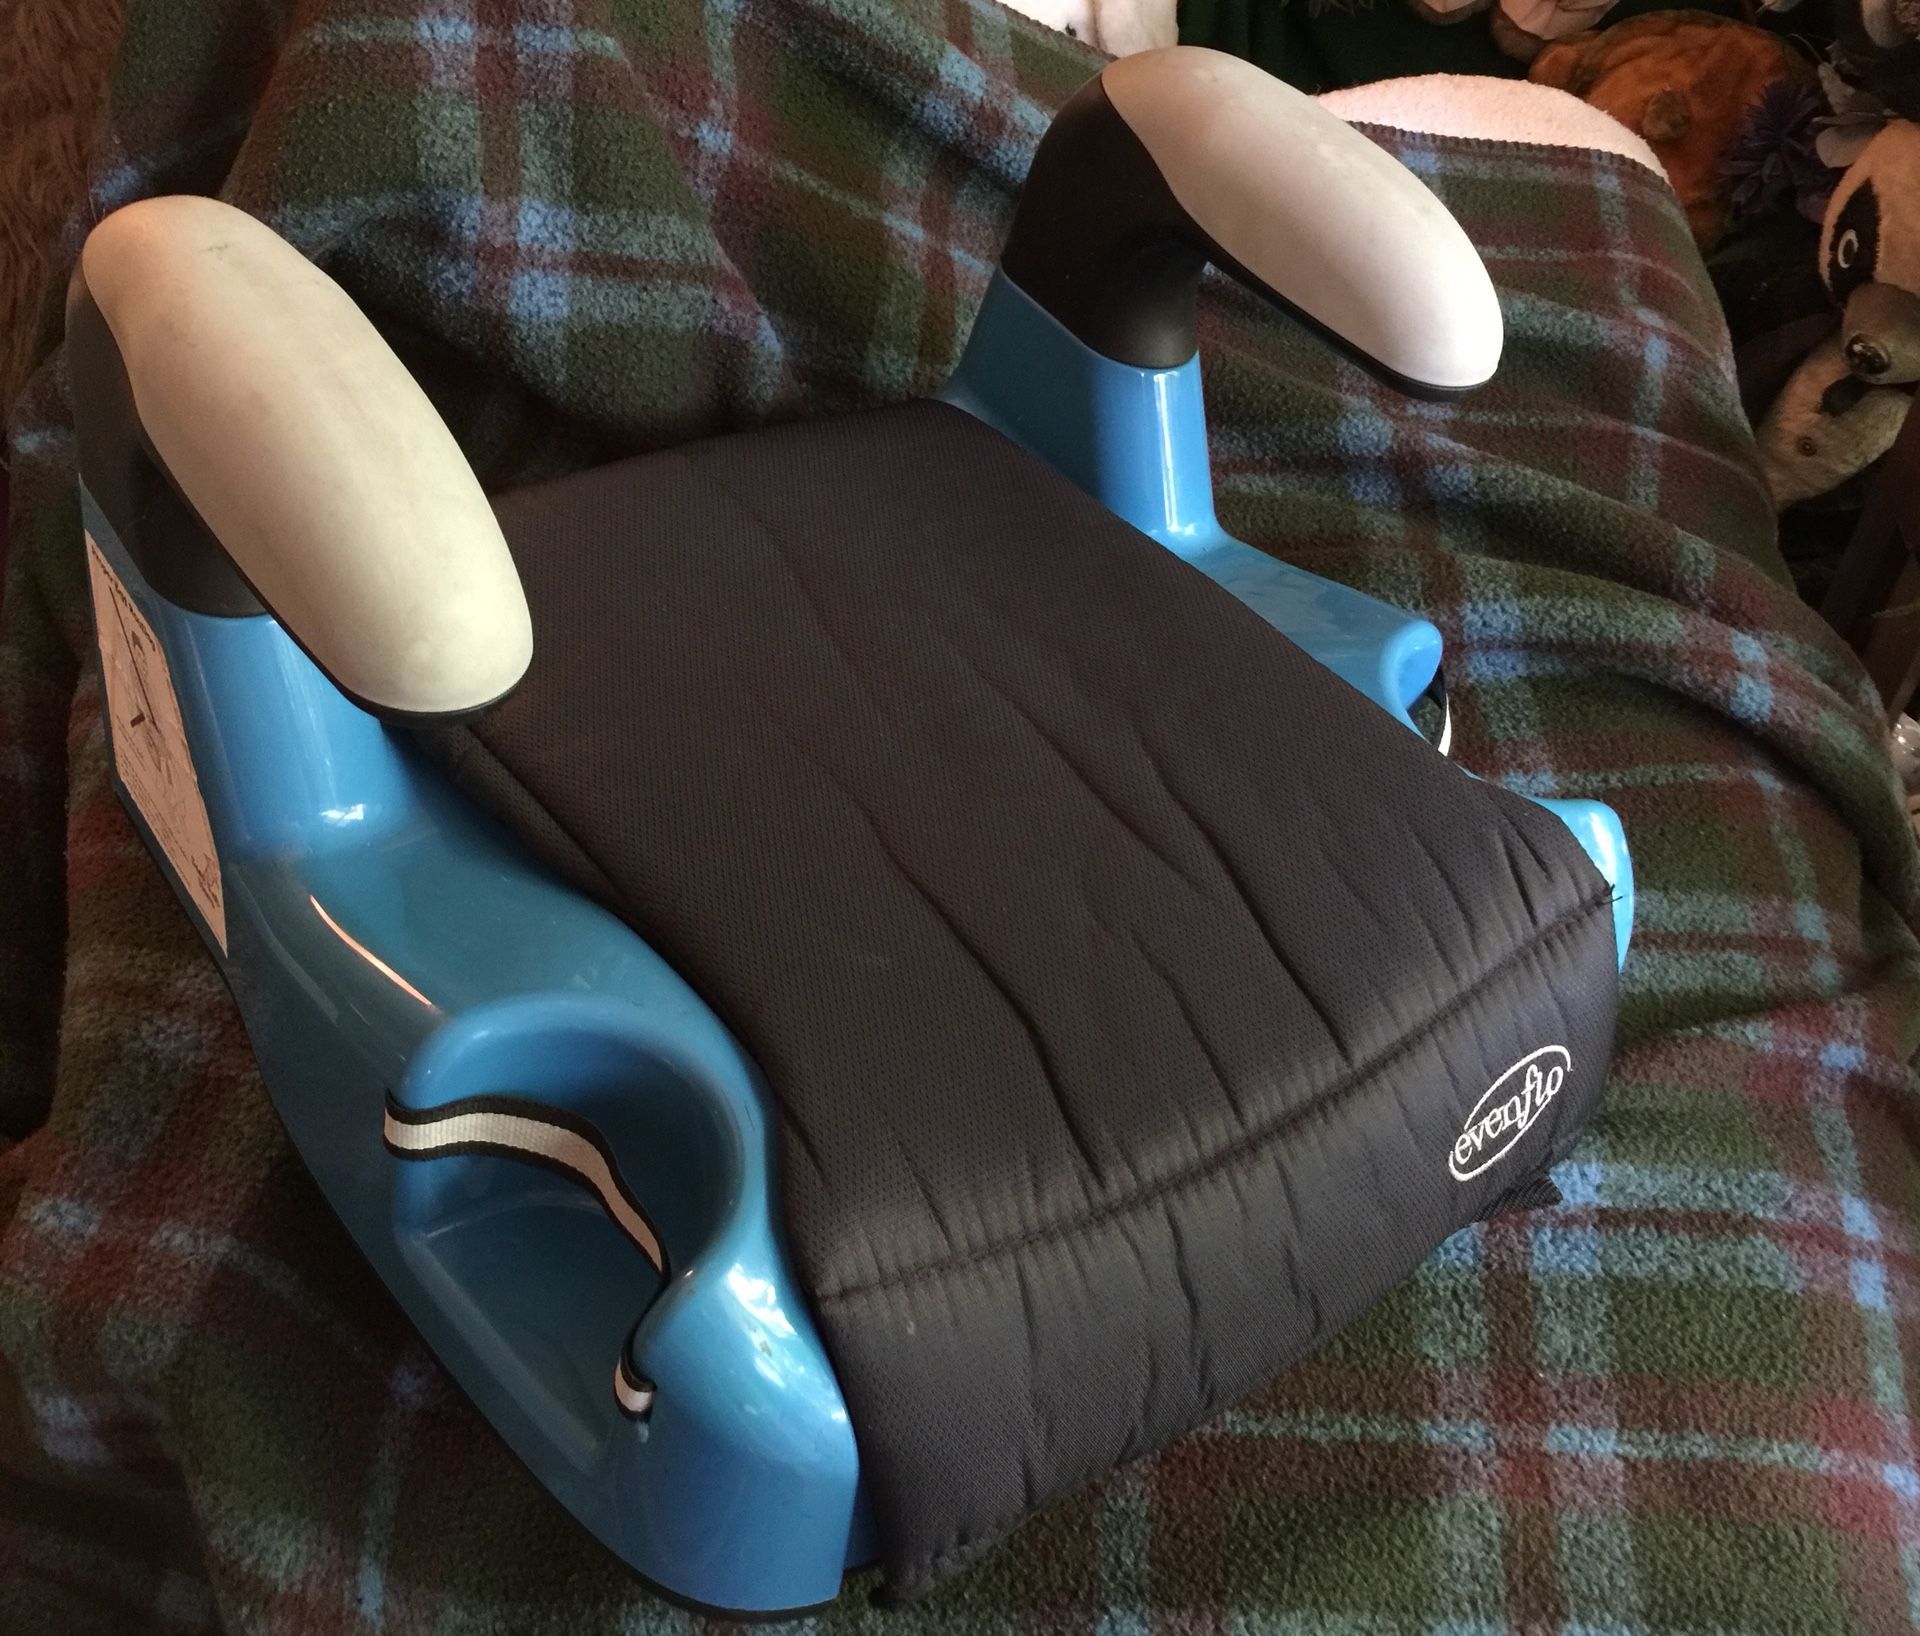 Evenflo Child car booster seat